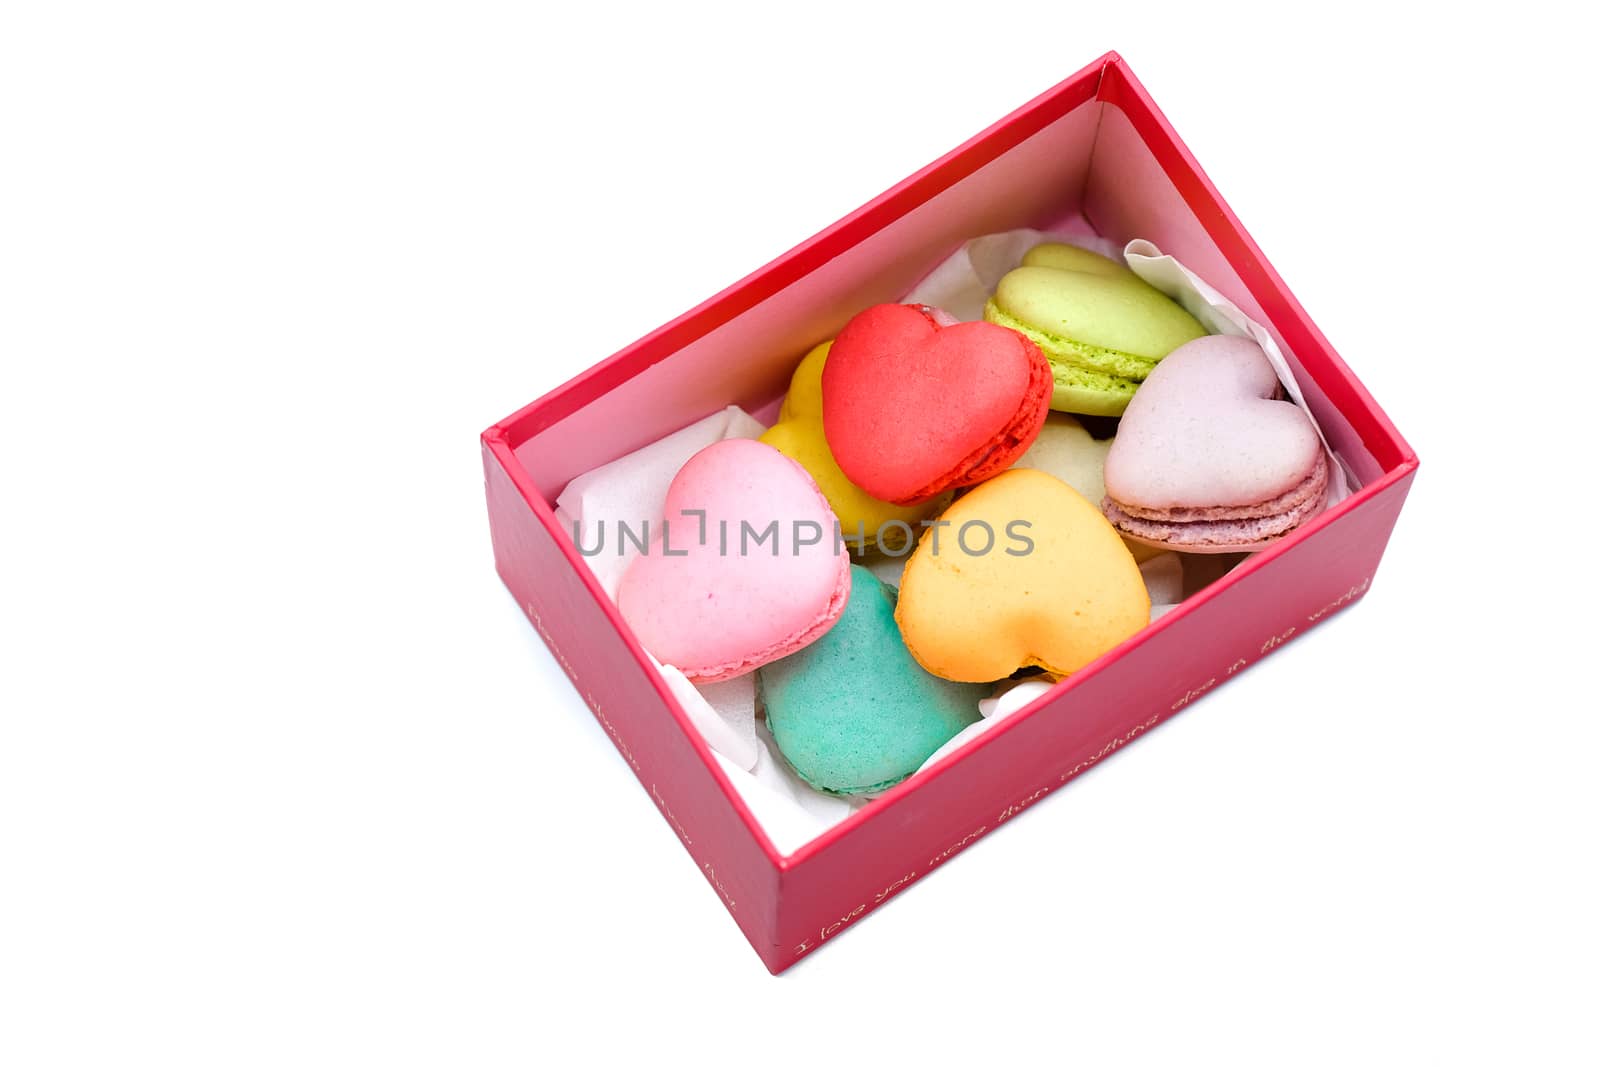 assortments of colorful heart shaped macaroons in a red box, isolated on white background, love, romance, anniversary, marriage, gift, Valentines' Day concept